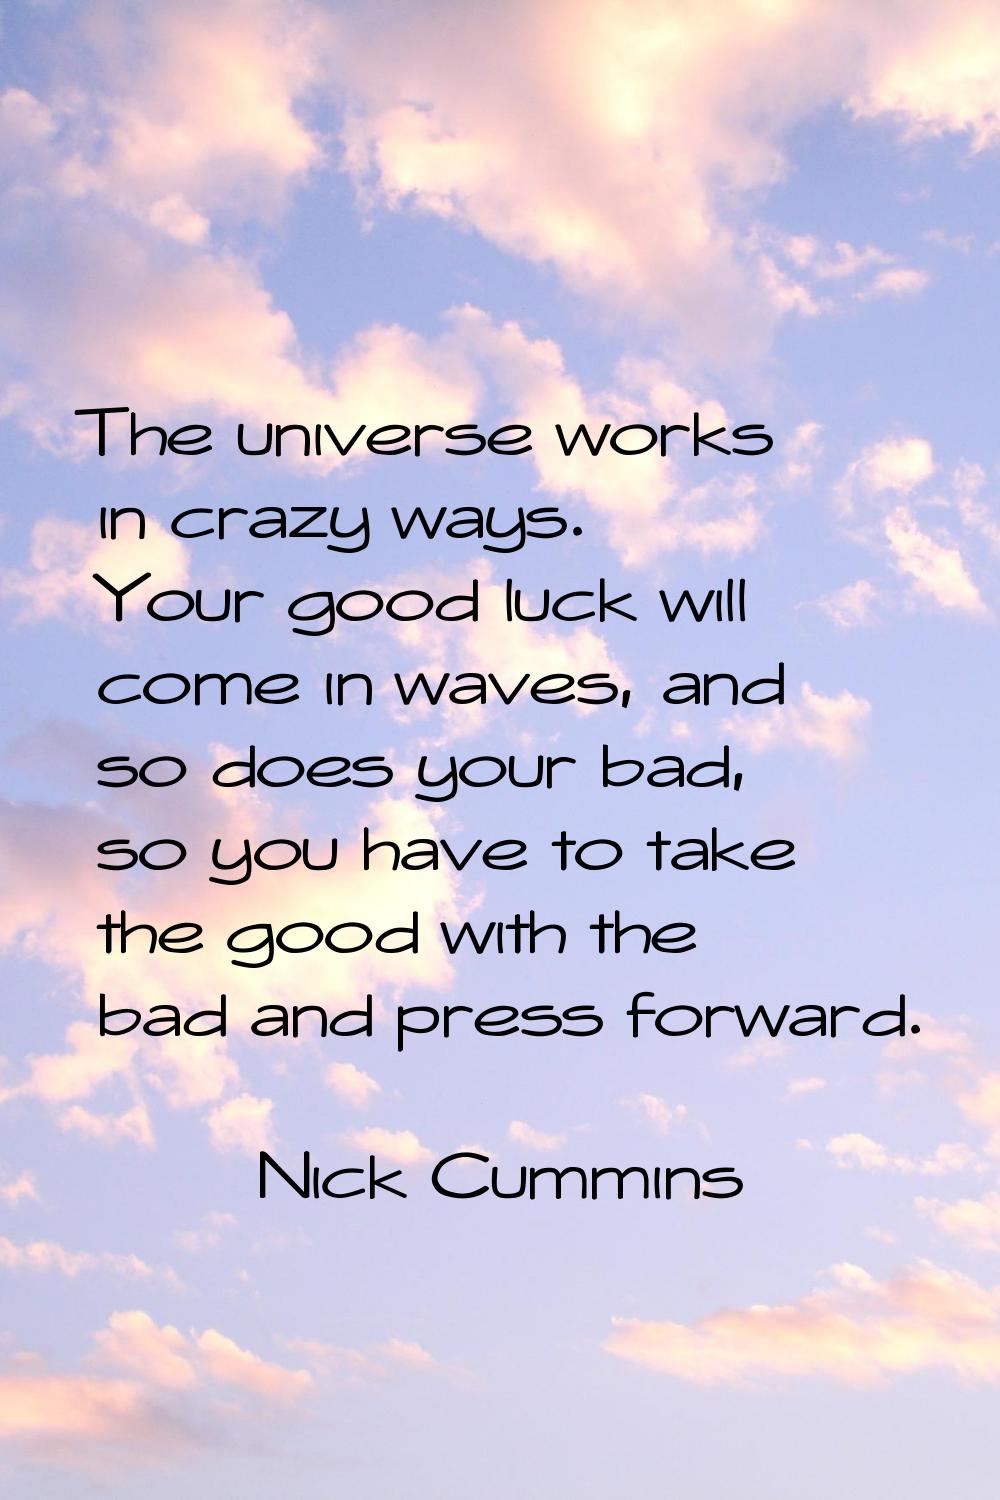 The universe works in crazy ways. Your good luck will come in waves, and so does your bad, so you h